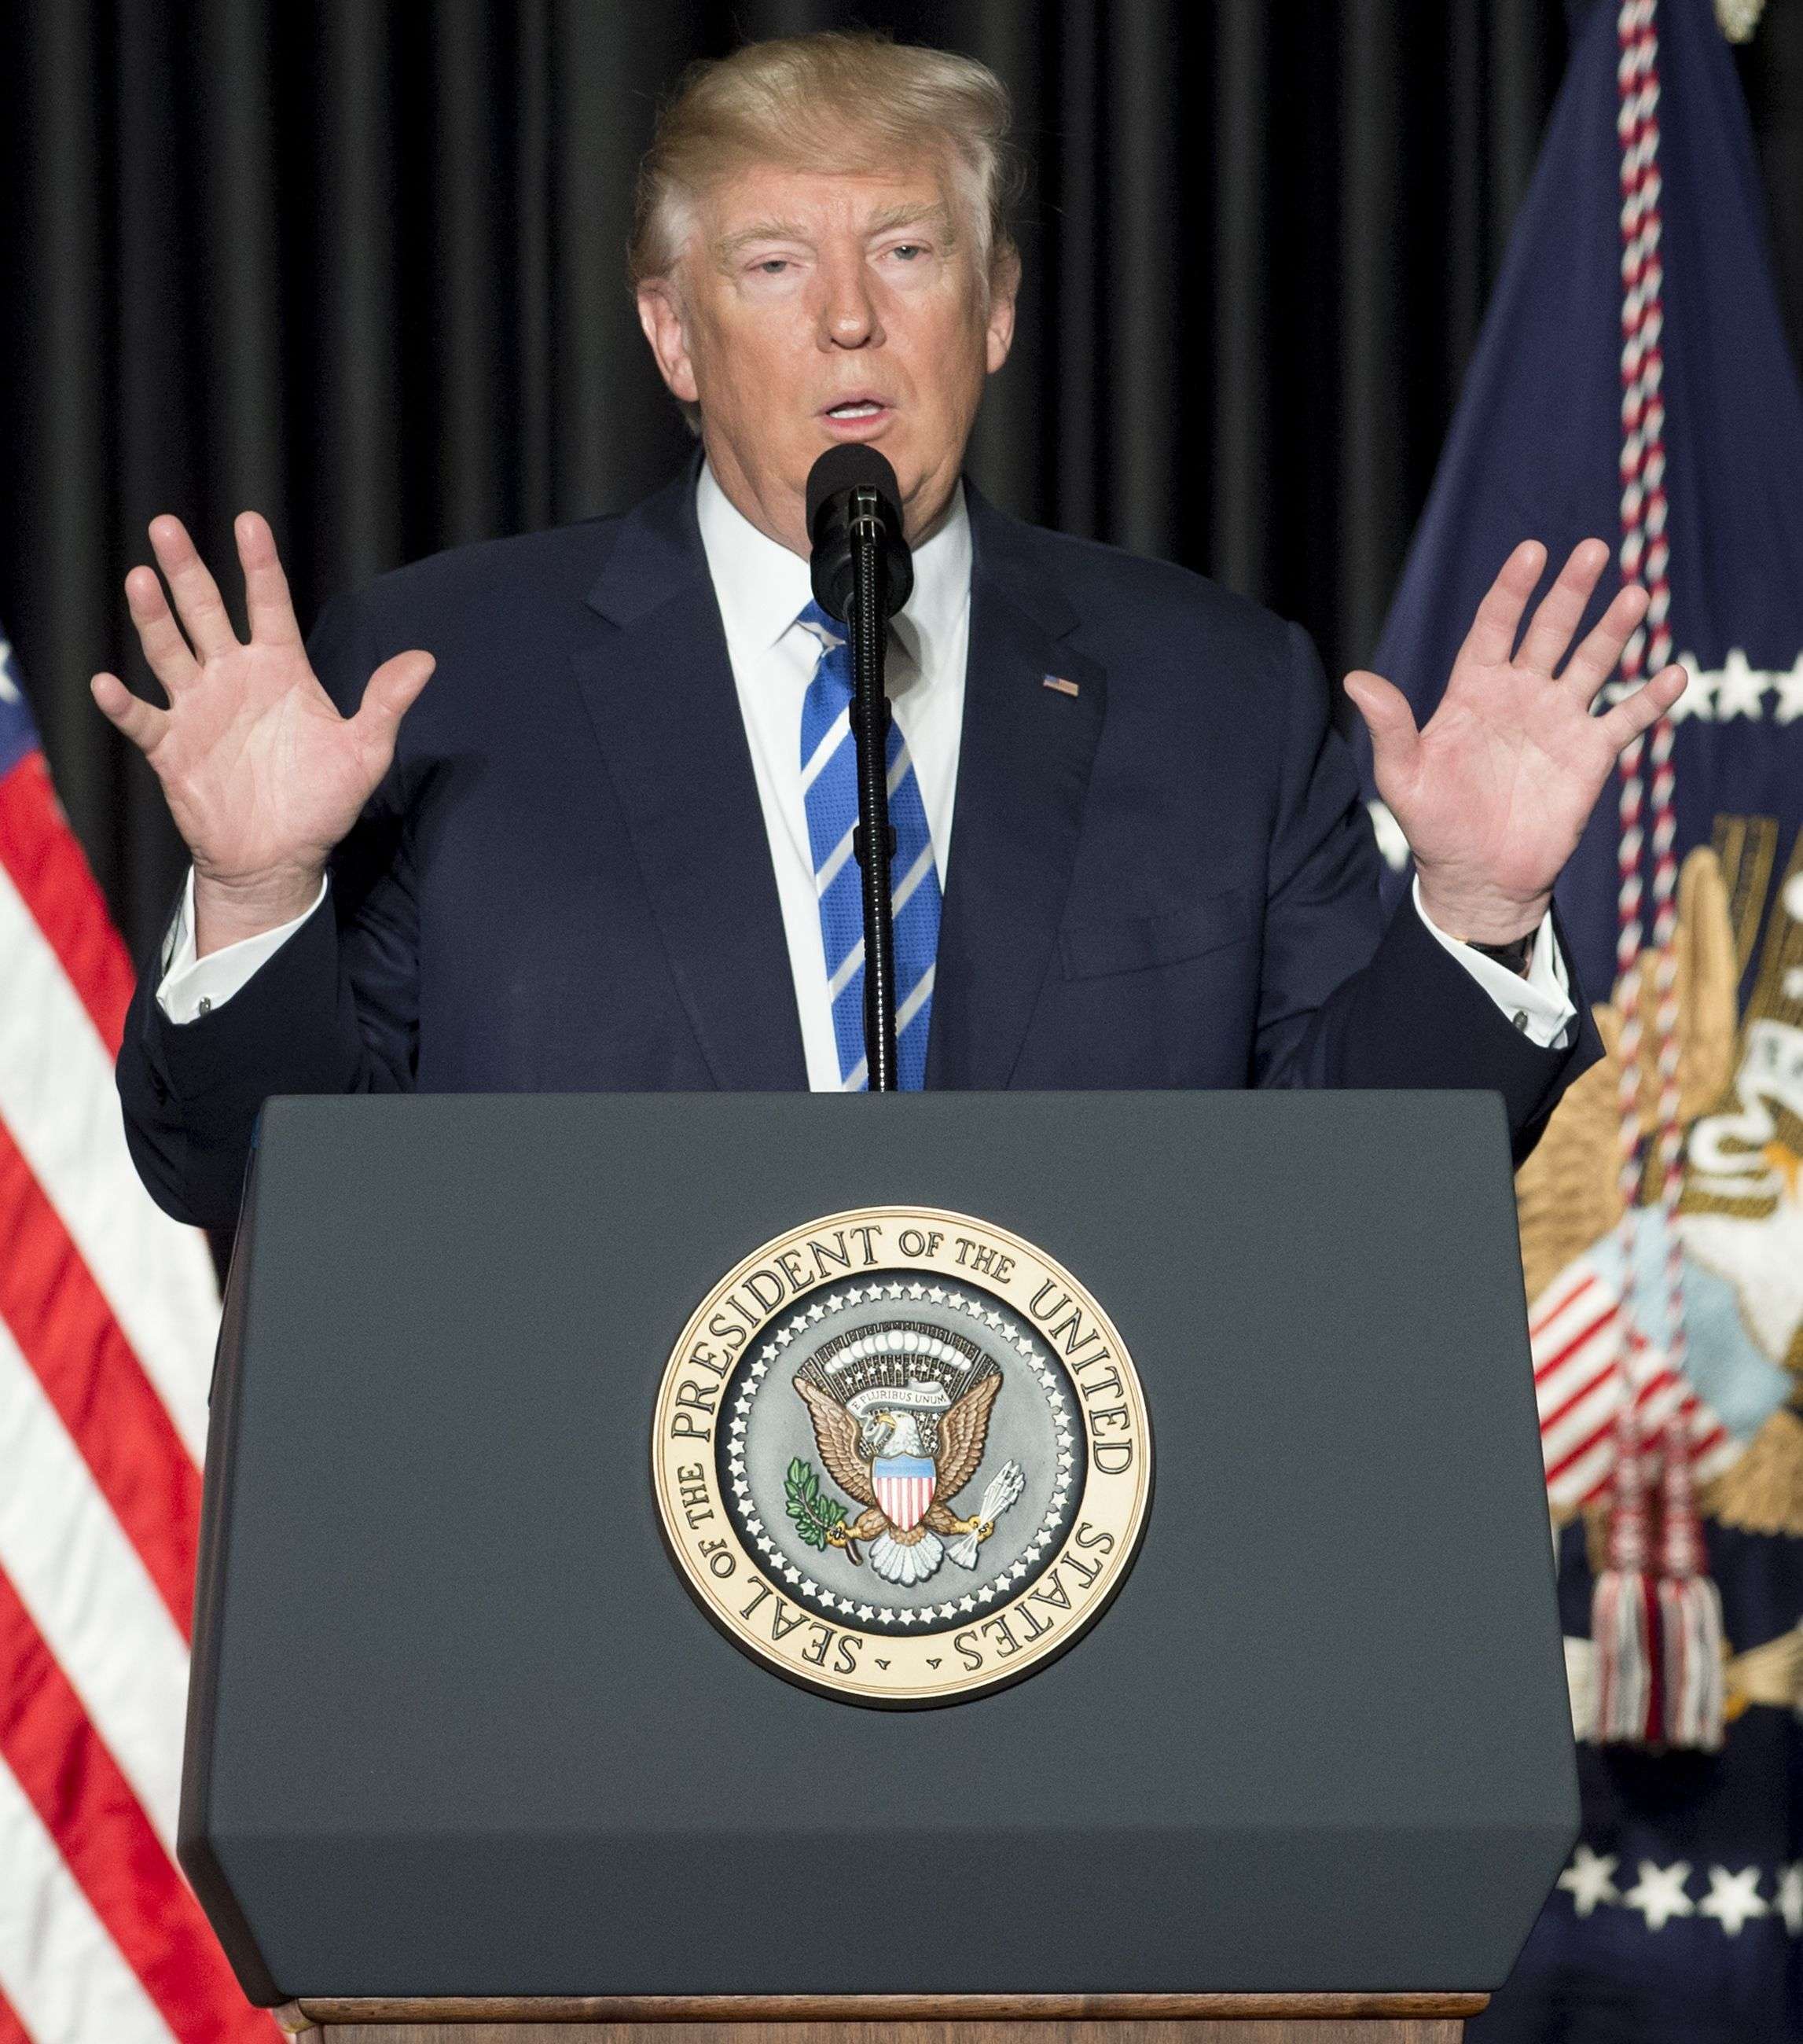 US President Donald Trump is “predictable in his unpredictability ... but there’s still a lot of uncertainties”, says William Choong, a senior fellow at the International Institute for Strategic Studies in Singapore. Photo: AFP